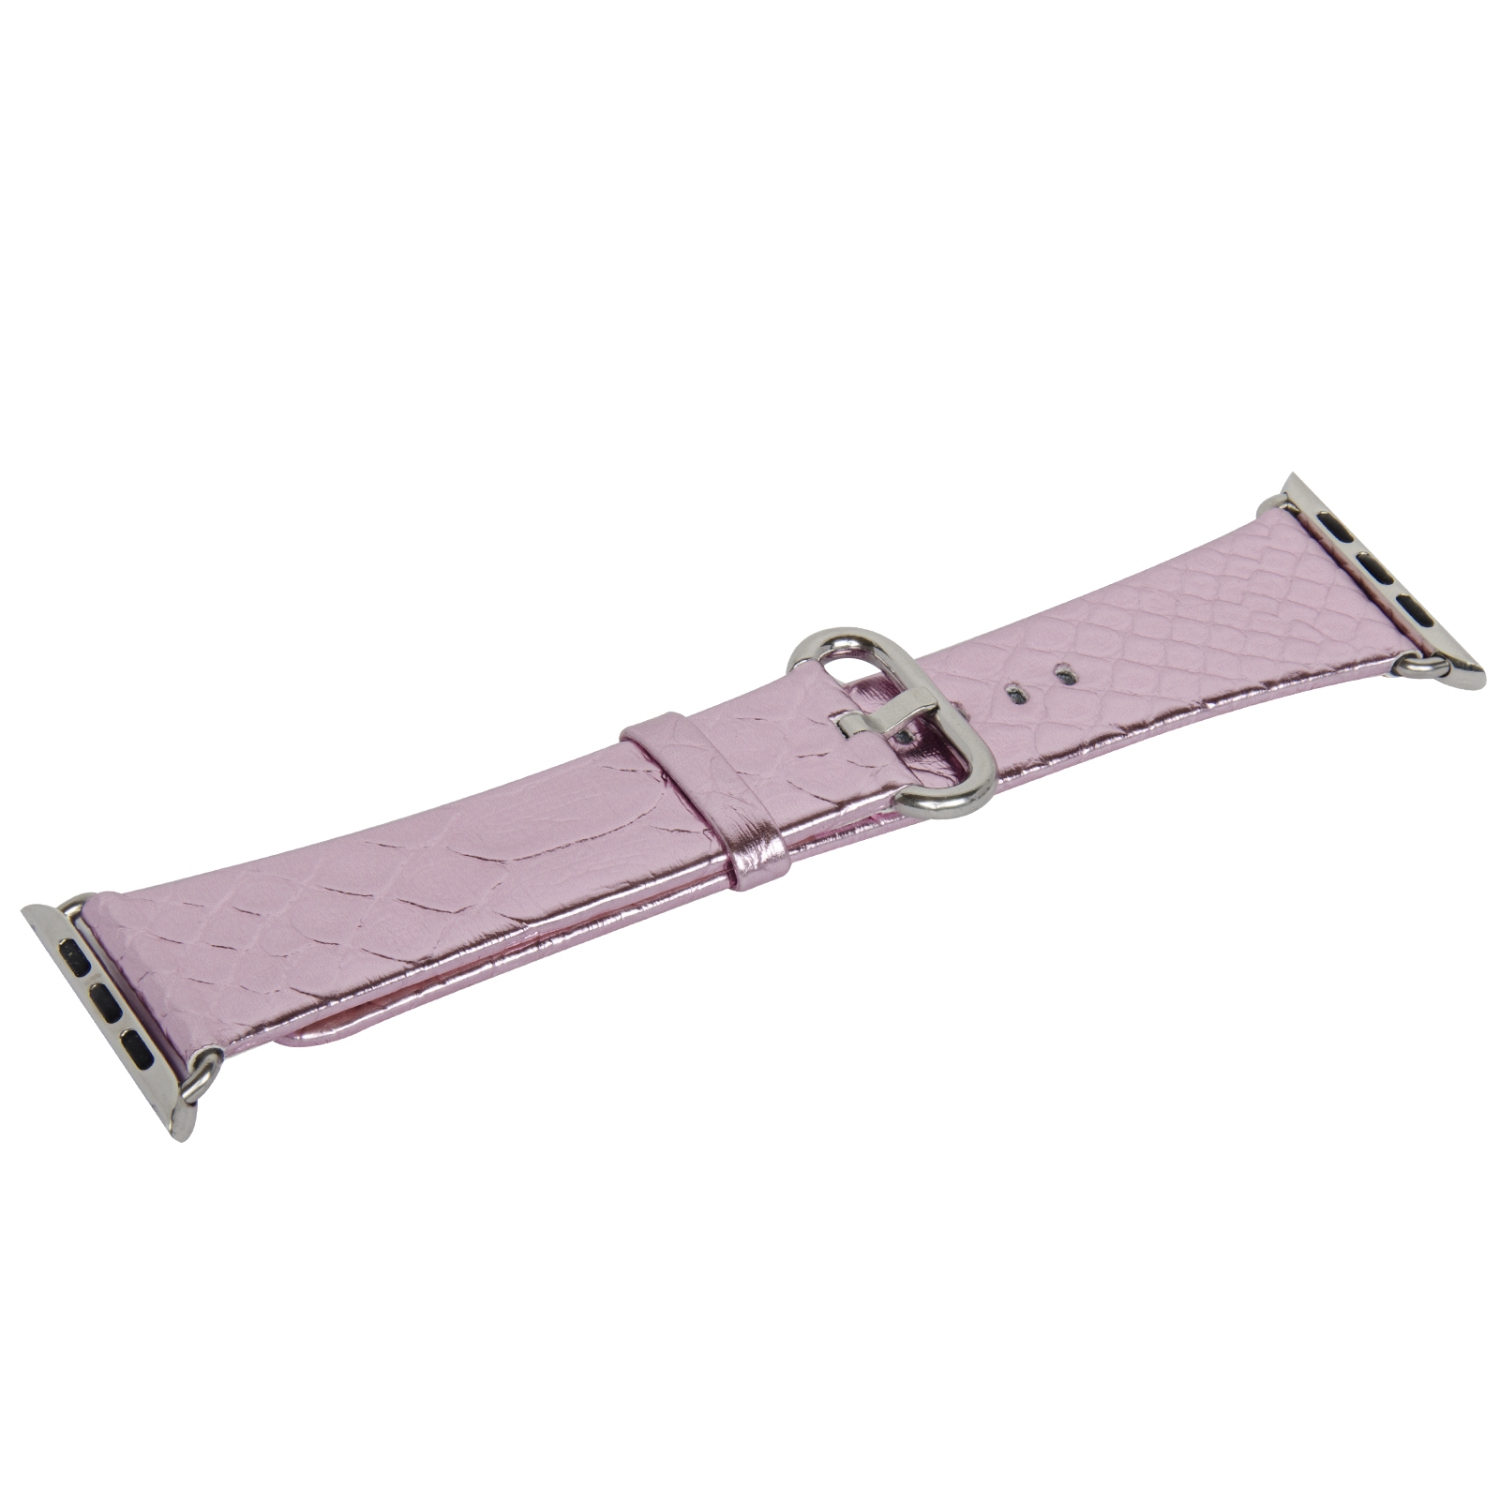 Shiny Leather Skin Replacement Apple Watch Band with Stainless Metal Clasp for iWatch Series 1/2/3/4/5/6/7/8 - 42mm/44mm/45mm - Pink